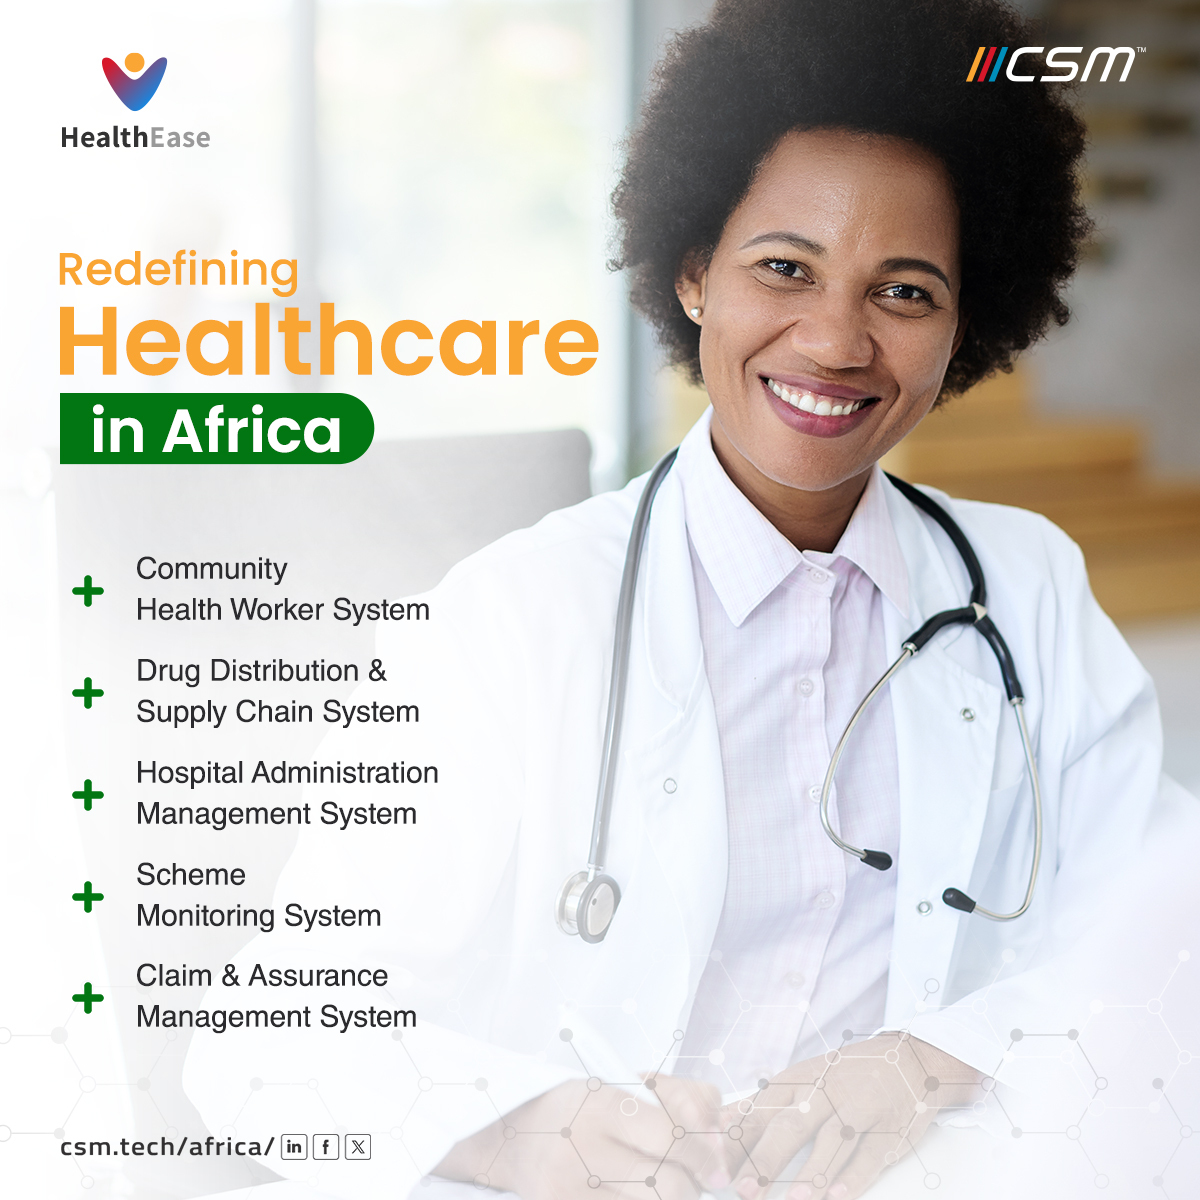 Redefining healthcare management with our integrated solutions 

👉Learn More: bit.ly/3QCqWpQ 

#CSMTech #CSMTechAfrica #Healthcare #HealthTech #HealthcareTechnology #HealthcareAnalytics